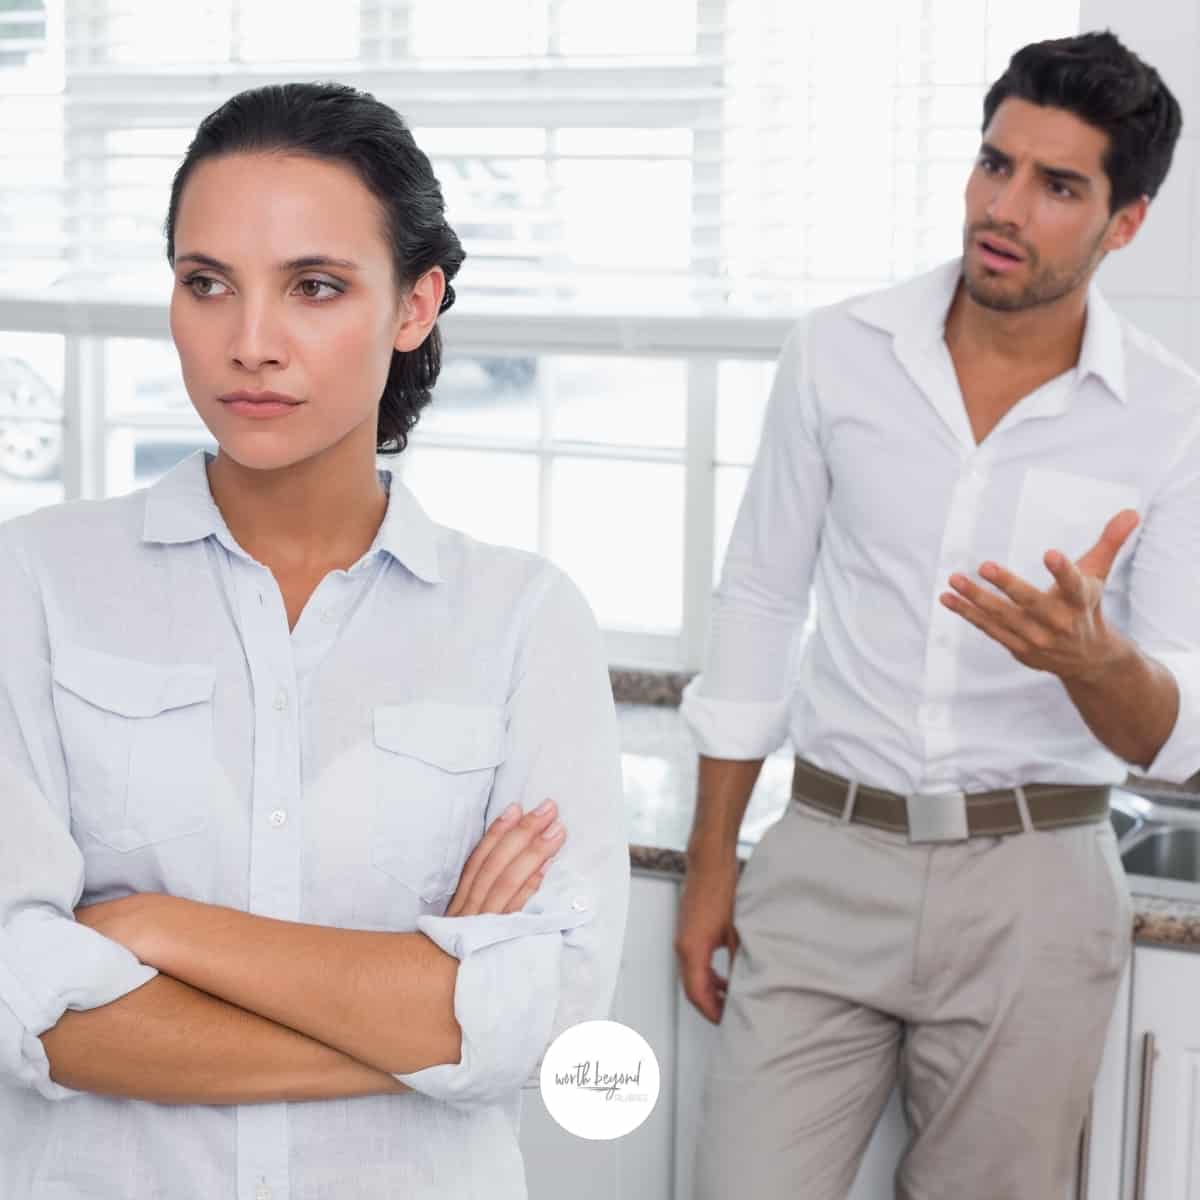 Marital Strife: Are You a Thermometer or a Thermostat?